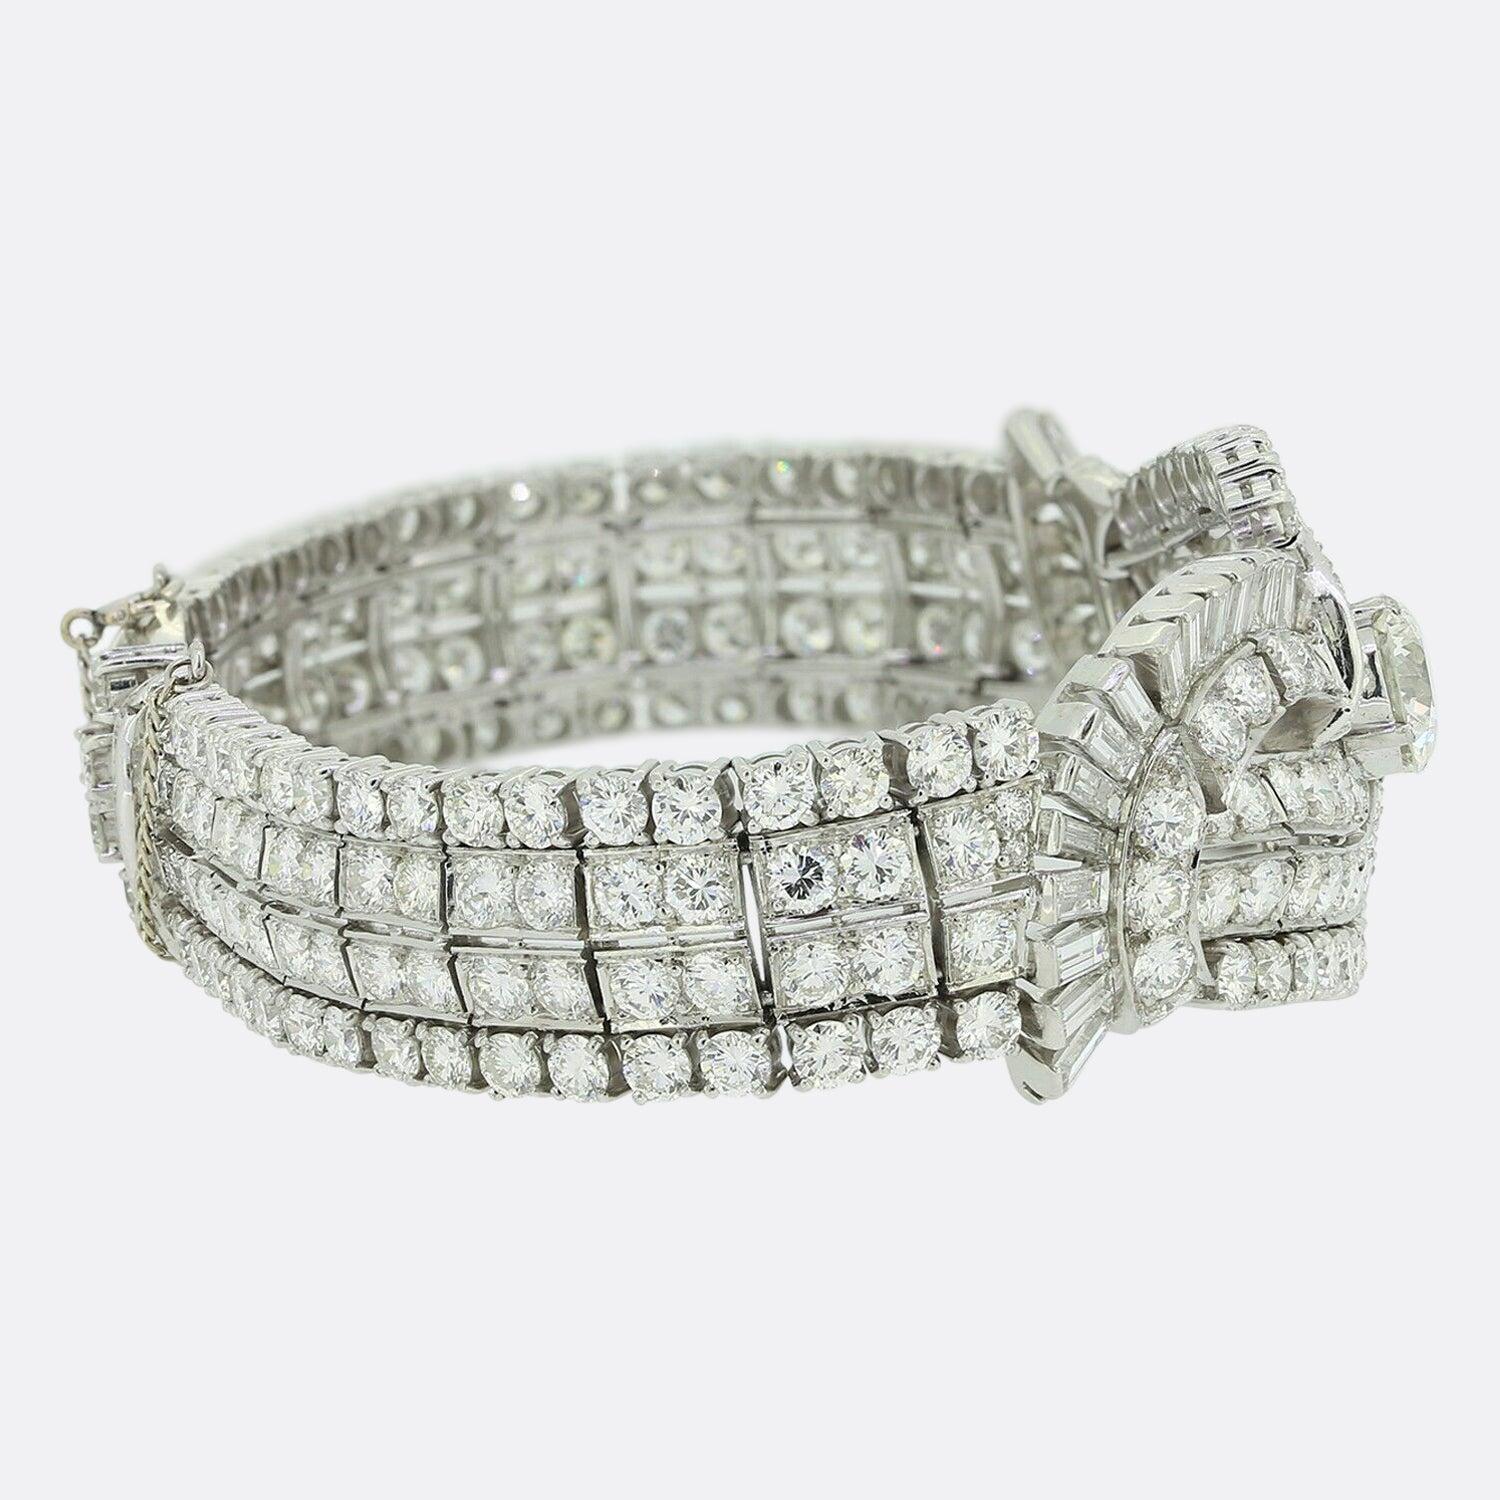 This is a truly wonderful bracelet that dates back to the 1970s. The bracelet plays host to a vast array of diamonds, the principal of which is a stunning 2.40 carat old European cut. The rest of the diamonds are a mixture of round brilliant and